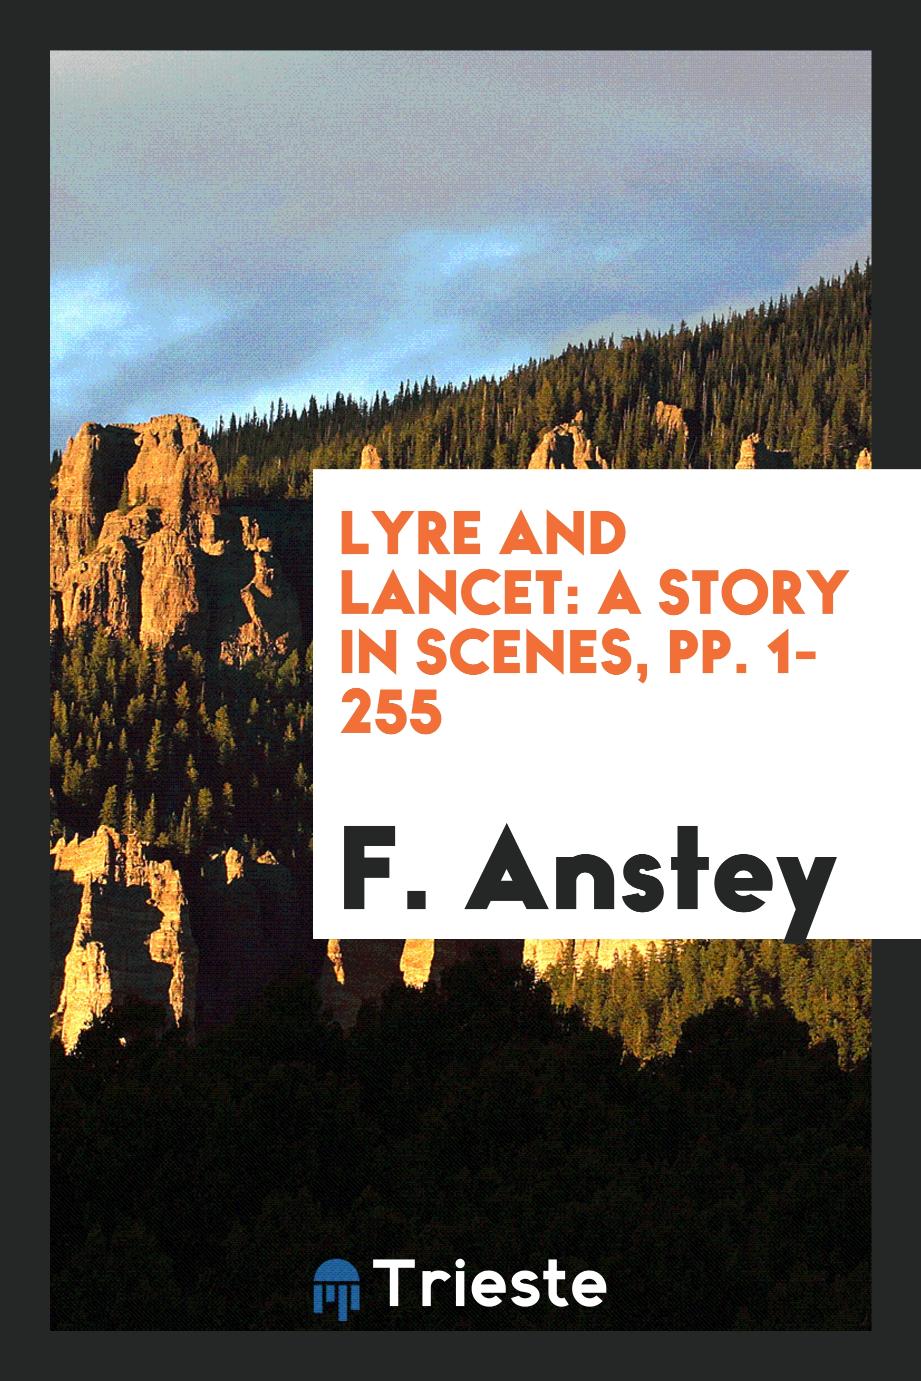 Lyre and Lancet: A Story in Scenes, pp. 1-255